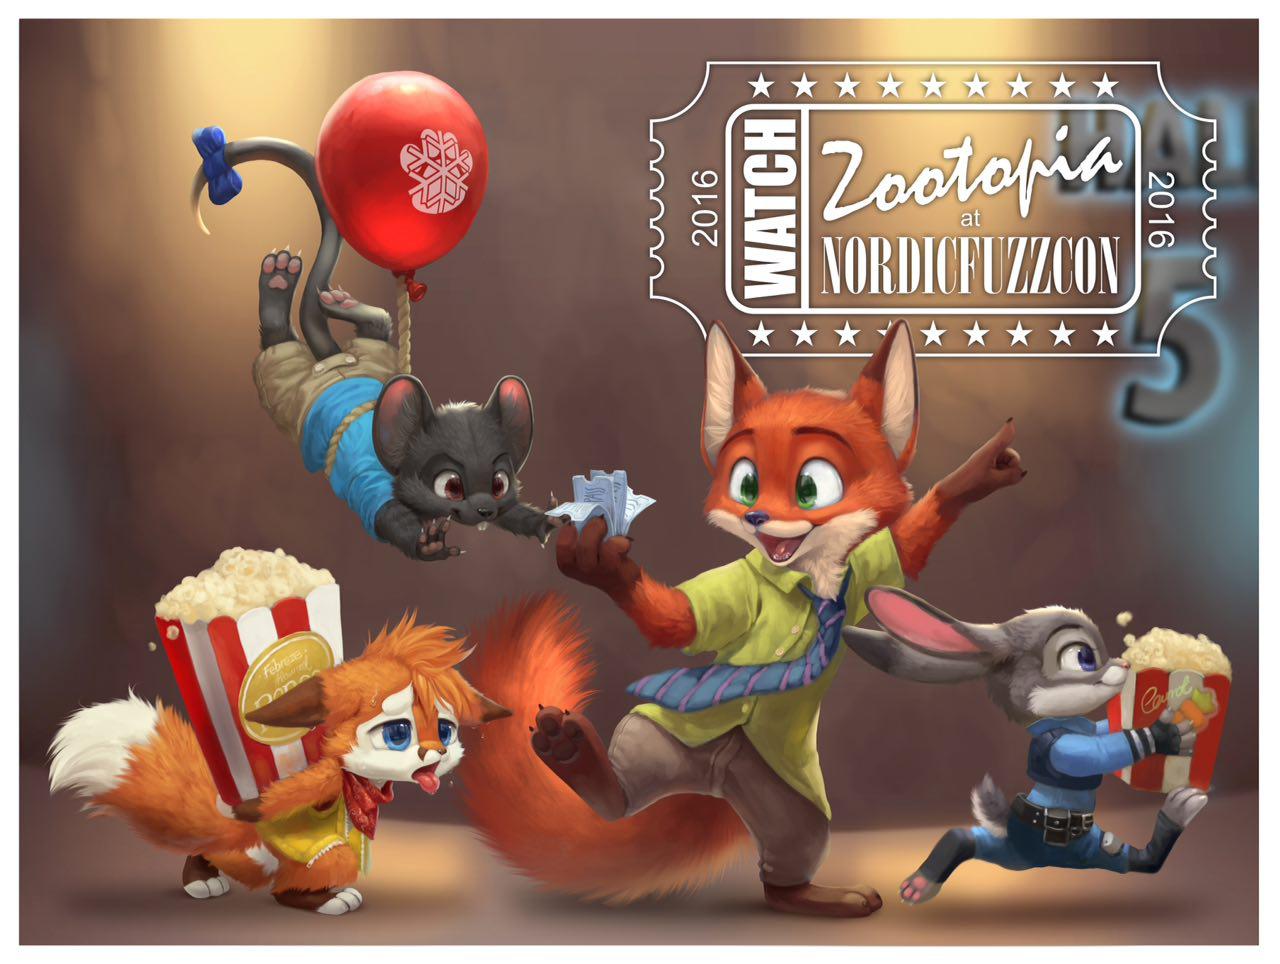 Stream episode [Watch~] Zootopia (2016) [[FulLMovIE]] Free OnLiNe Mp4  [E9918E] by fontooo0 podcast | Listen online for free on SoundCloud